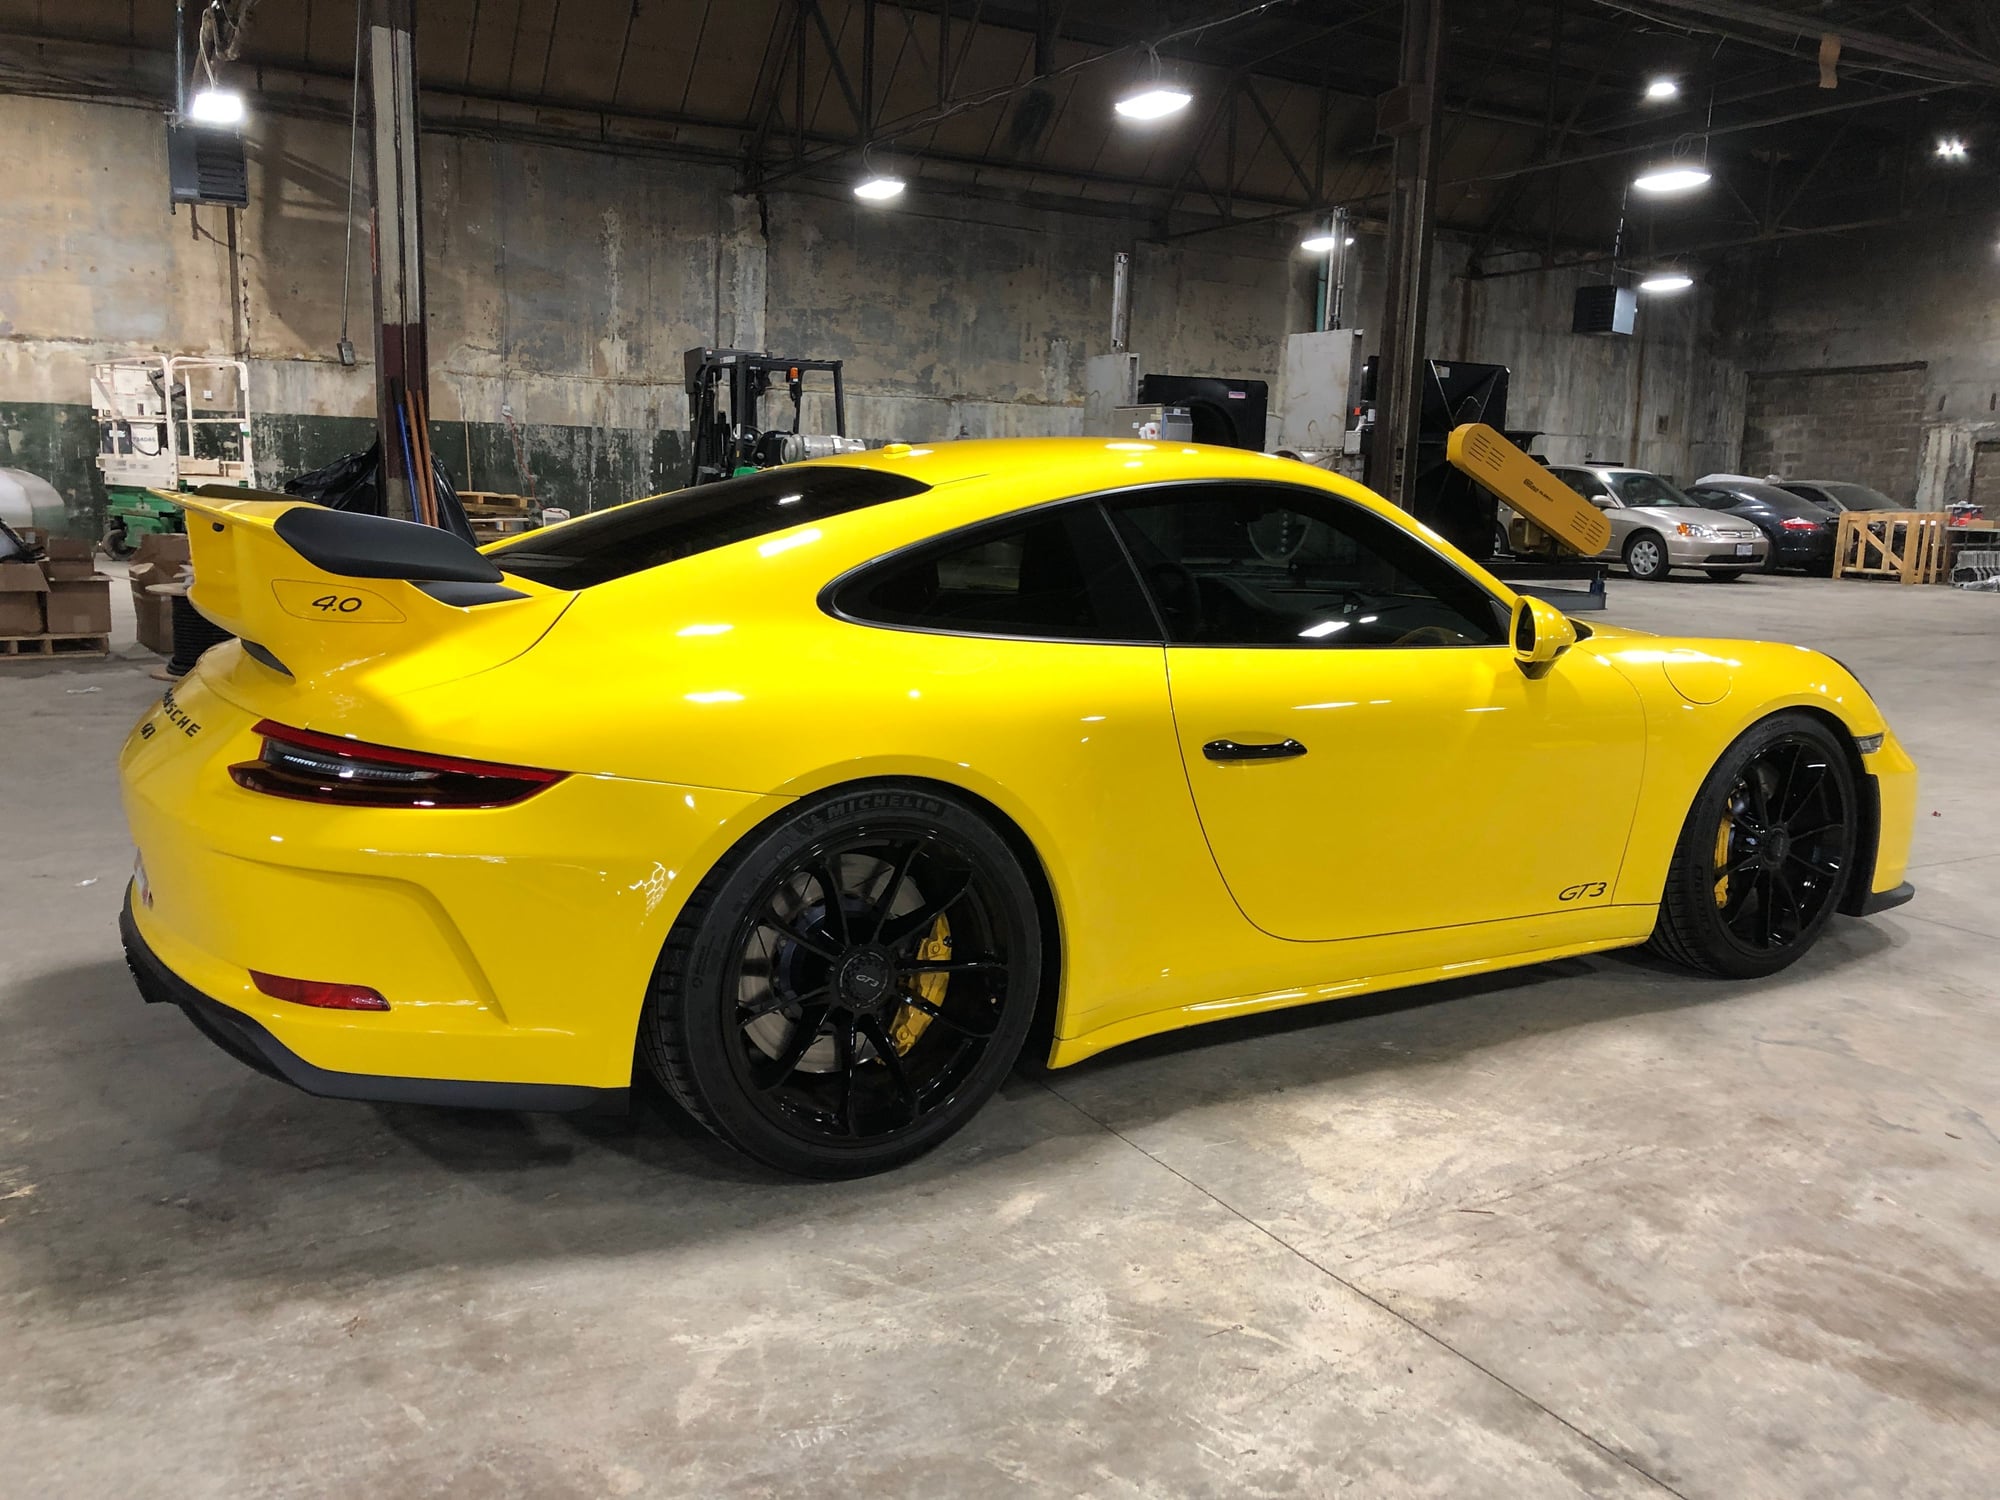 2018 Porsche GT3 -  - Used - VIN WP0AC2A93JS175420 - 34,360 Miles - 6 cyl - 2WD - Manual - Coupe - Yellow - Cincinnati, OH 45202, United States